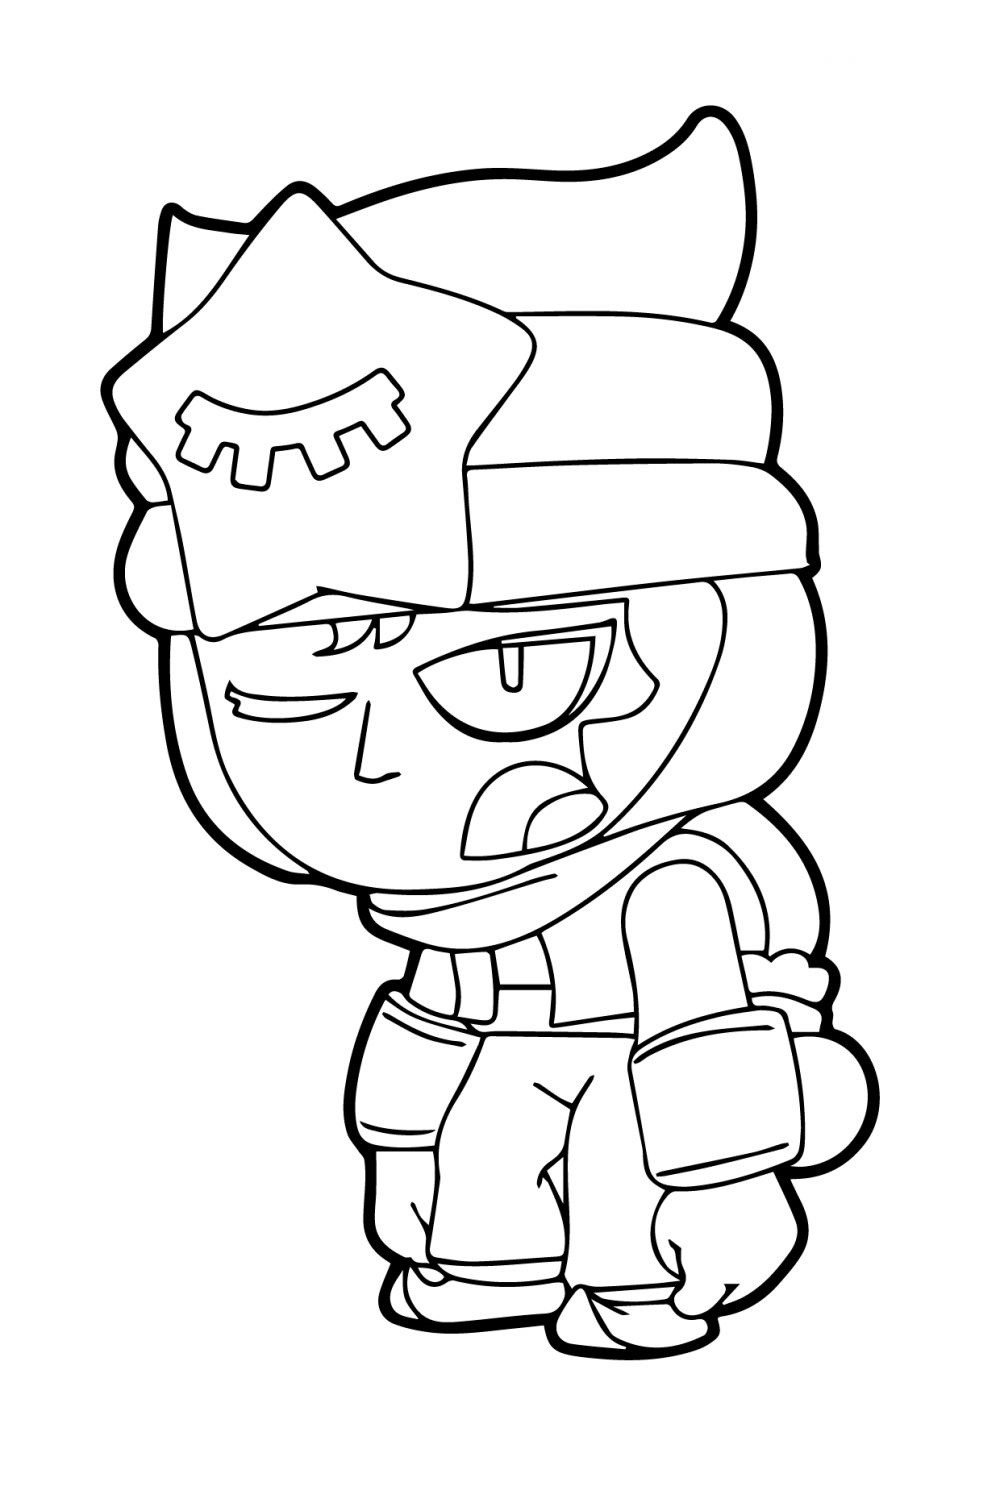 Sandy Coloring Pages Print Brawl Stars Character For Free - spike brawl stars à colorier